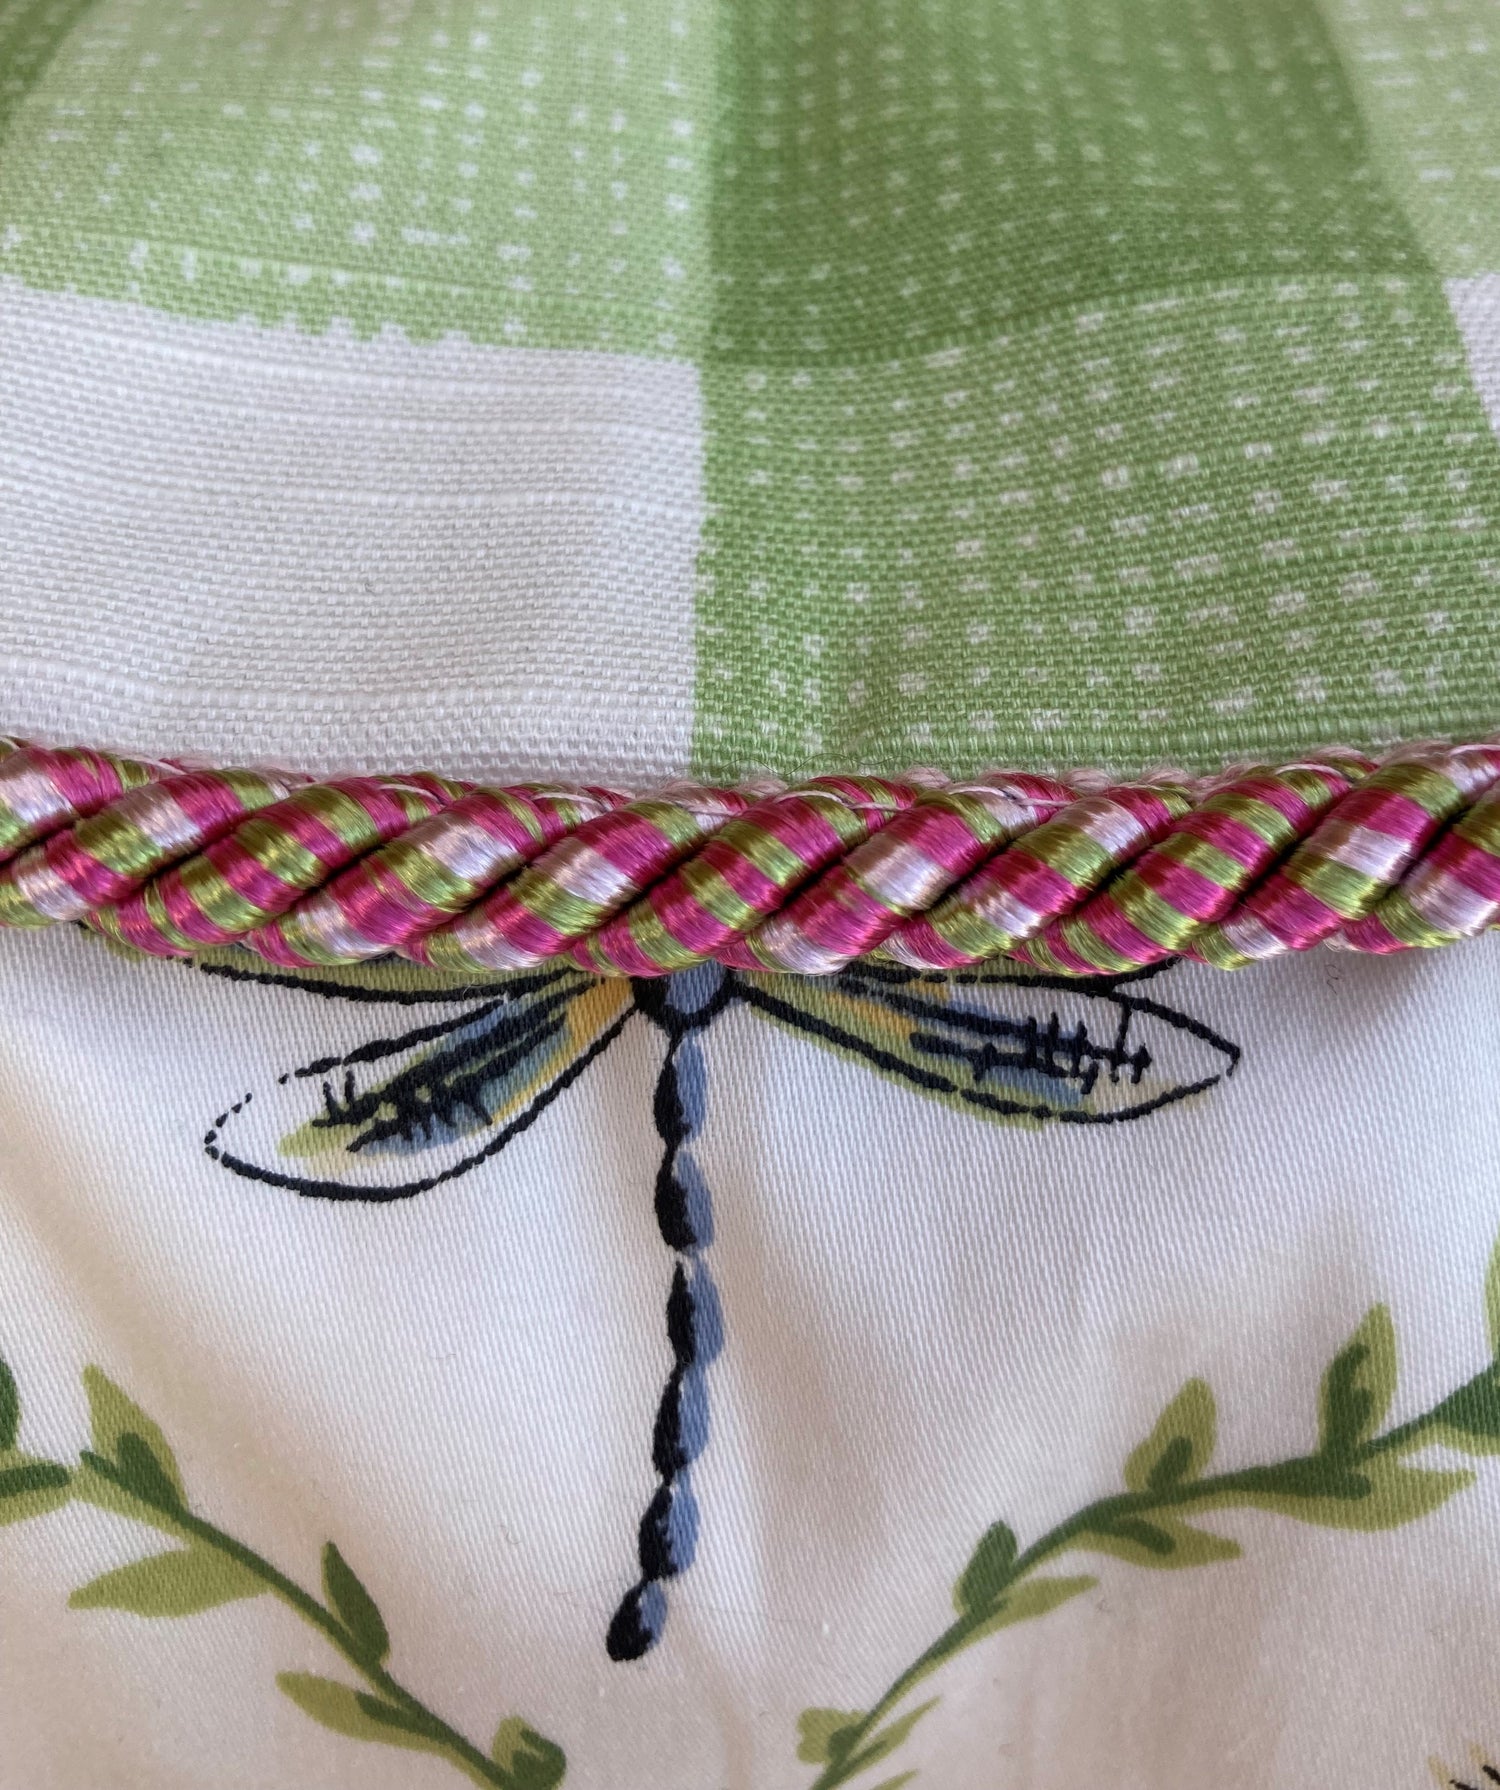 Charming Pink and Green Garden Bugs 24 x 24 Square Designer Pillow Side with Down Feather Insert